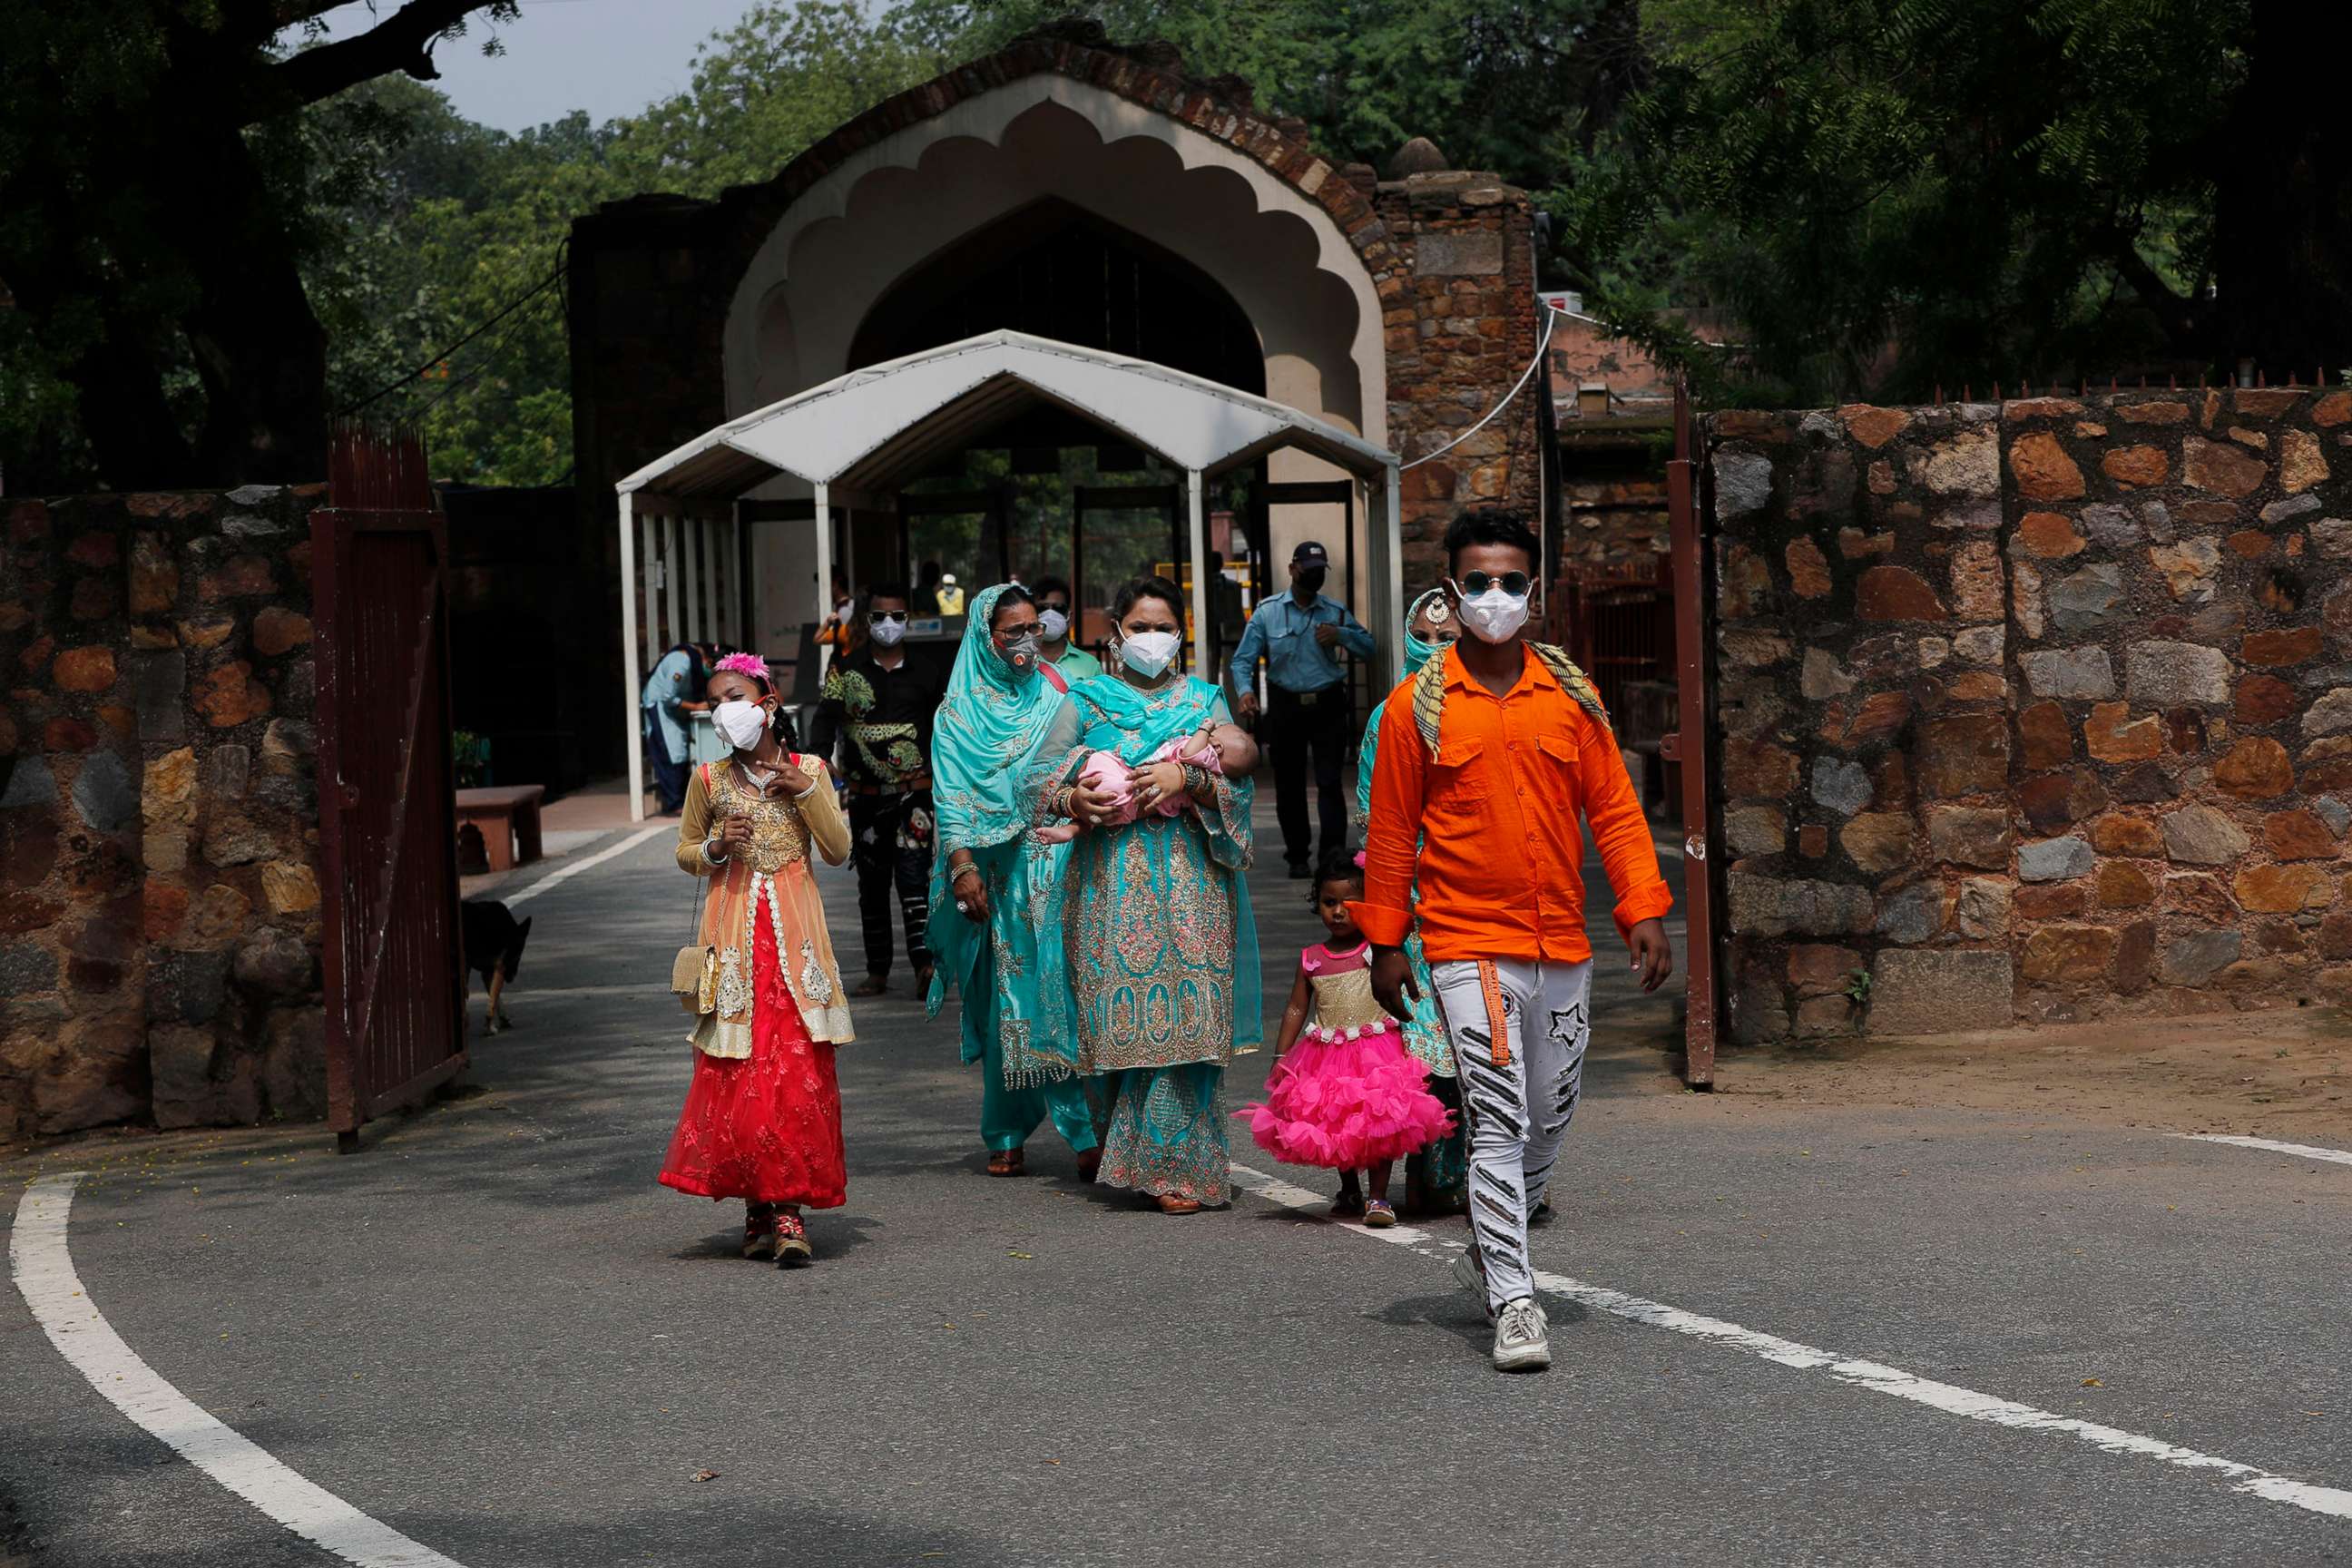 PHOTO: A family visits the Qutab Minar monument after monuments across India were reopened after almost four moths of lockdown to control the spread of coronavirus, in New Delhi, India, July 6, 2020.